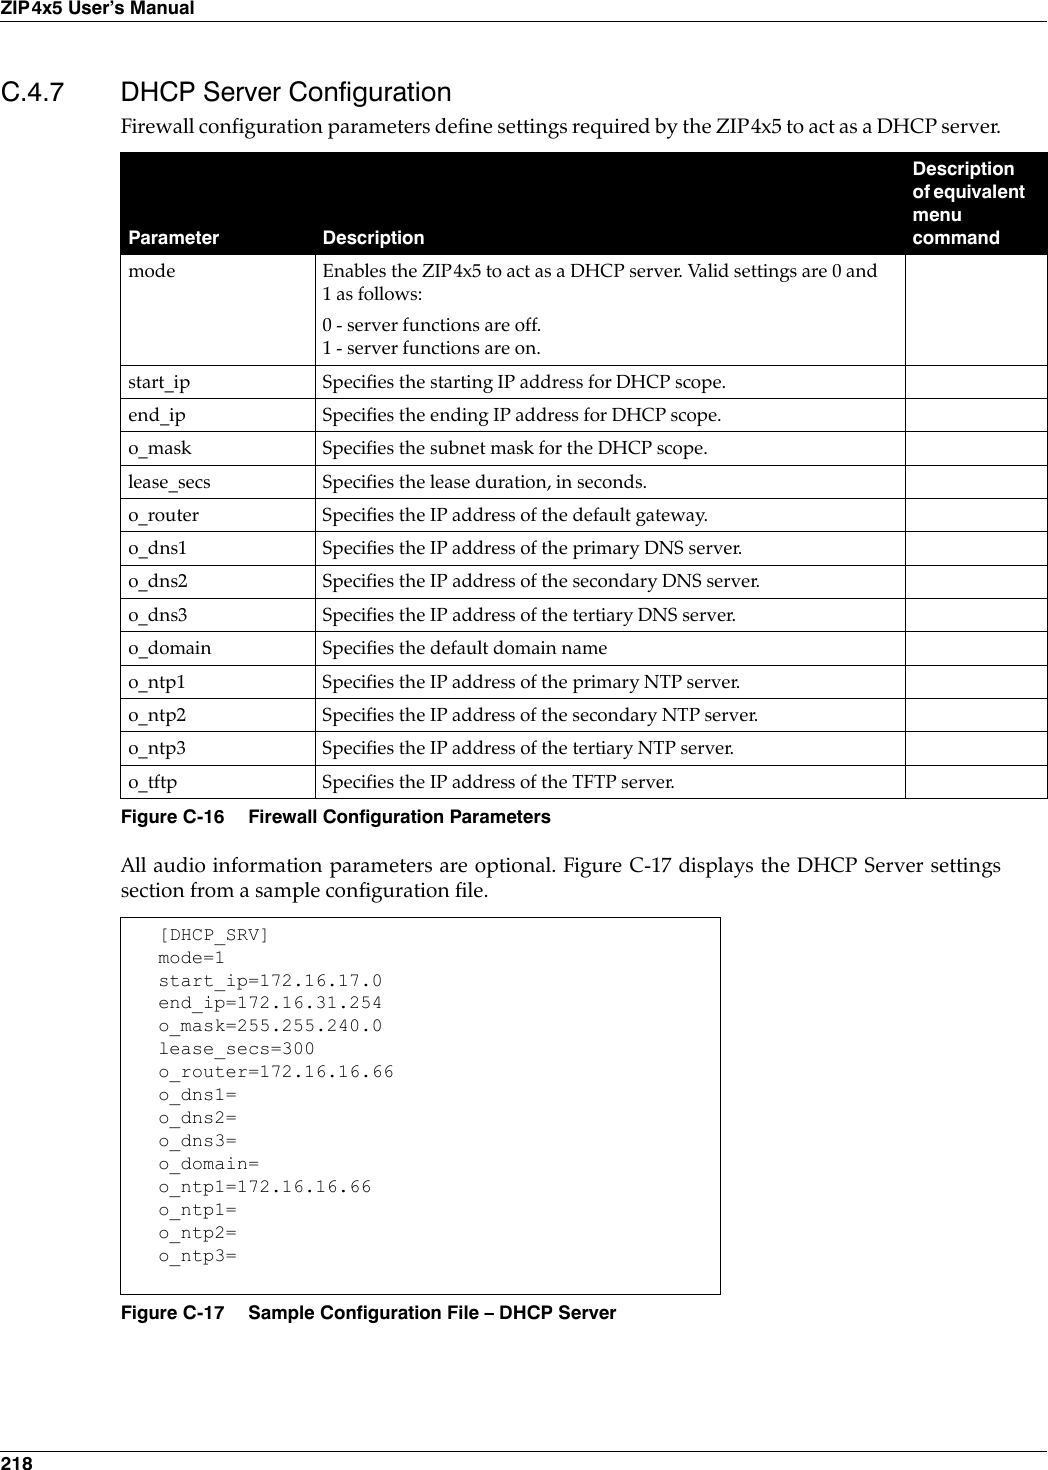 218ZIP4x5 User’s ManualC.4.7 DHCP Server ConfigurationFirewall configuration parameters define settings required by the ZIP4x5 to act as a DHCP server.All audio information parameters are optional. Figure C-17 displays the DHCP Server settingssection from a sample configuration file.Parameter DescriptionDescription of equivalent menu commandmode Enables the ZIP4x5 to act as a DHCP server. Valid settings are 0 and 1 as follows:0 - server functions are off.1 - server functions are on.start_ip Specifies the starting IP address for DHCP scope.end_ip Specifies the ending IP address for DHCP scope. o_mask Specifies the subnet mask for the DHCP scope.lease_secs Specifies the lease duration, in seconds.o_router Specifies the IP address of the default gateway.o_dns1 Specifies the IP address of the primary DNS server.o_dns2 Specifies the IP address of the secondary DNS server.o_dns3 Specifies the IP address of the tertiary DNS server.o_domain Specifies the default domain nameo_ntp1 Specifies the IP address of the primary NTP server.o_ntp2 Specifies the IP address of the secondary NTP server.o_ntp3 Specifies the IP address of the tertiary NTP server.o_tftp Specifies the IP address of the TFTP server.Figure C-16 Firewall Configuration Parameters[DHCP_SRV]mode=1start_ip=172.16.17.0end_ip=172.16.31.254o_mask=255.255.240.0lease_secs=300o_router=172.16.16.66o_dns1=o_dns2=o_dns3=o_domain=o_ntp1=172.16.16.66o_ntp1=o_ntp2=o_ntp3=Figure C-17 Sample Configuration File – DHCP Server